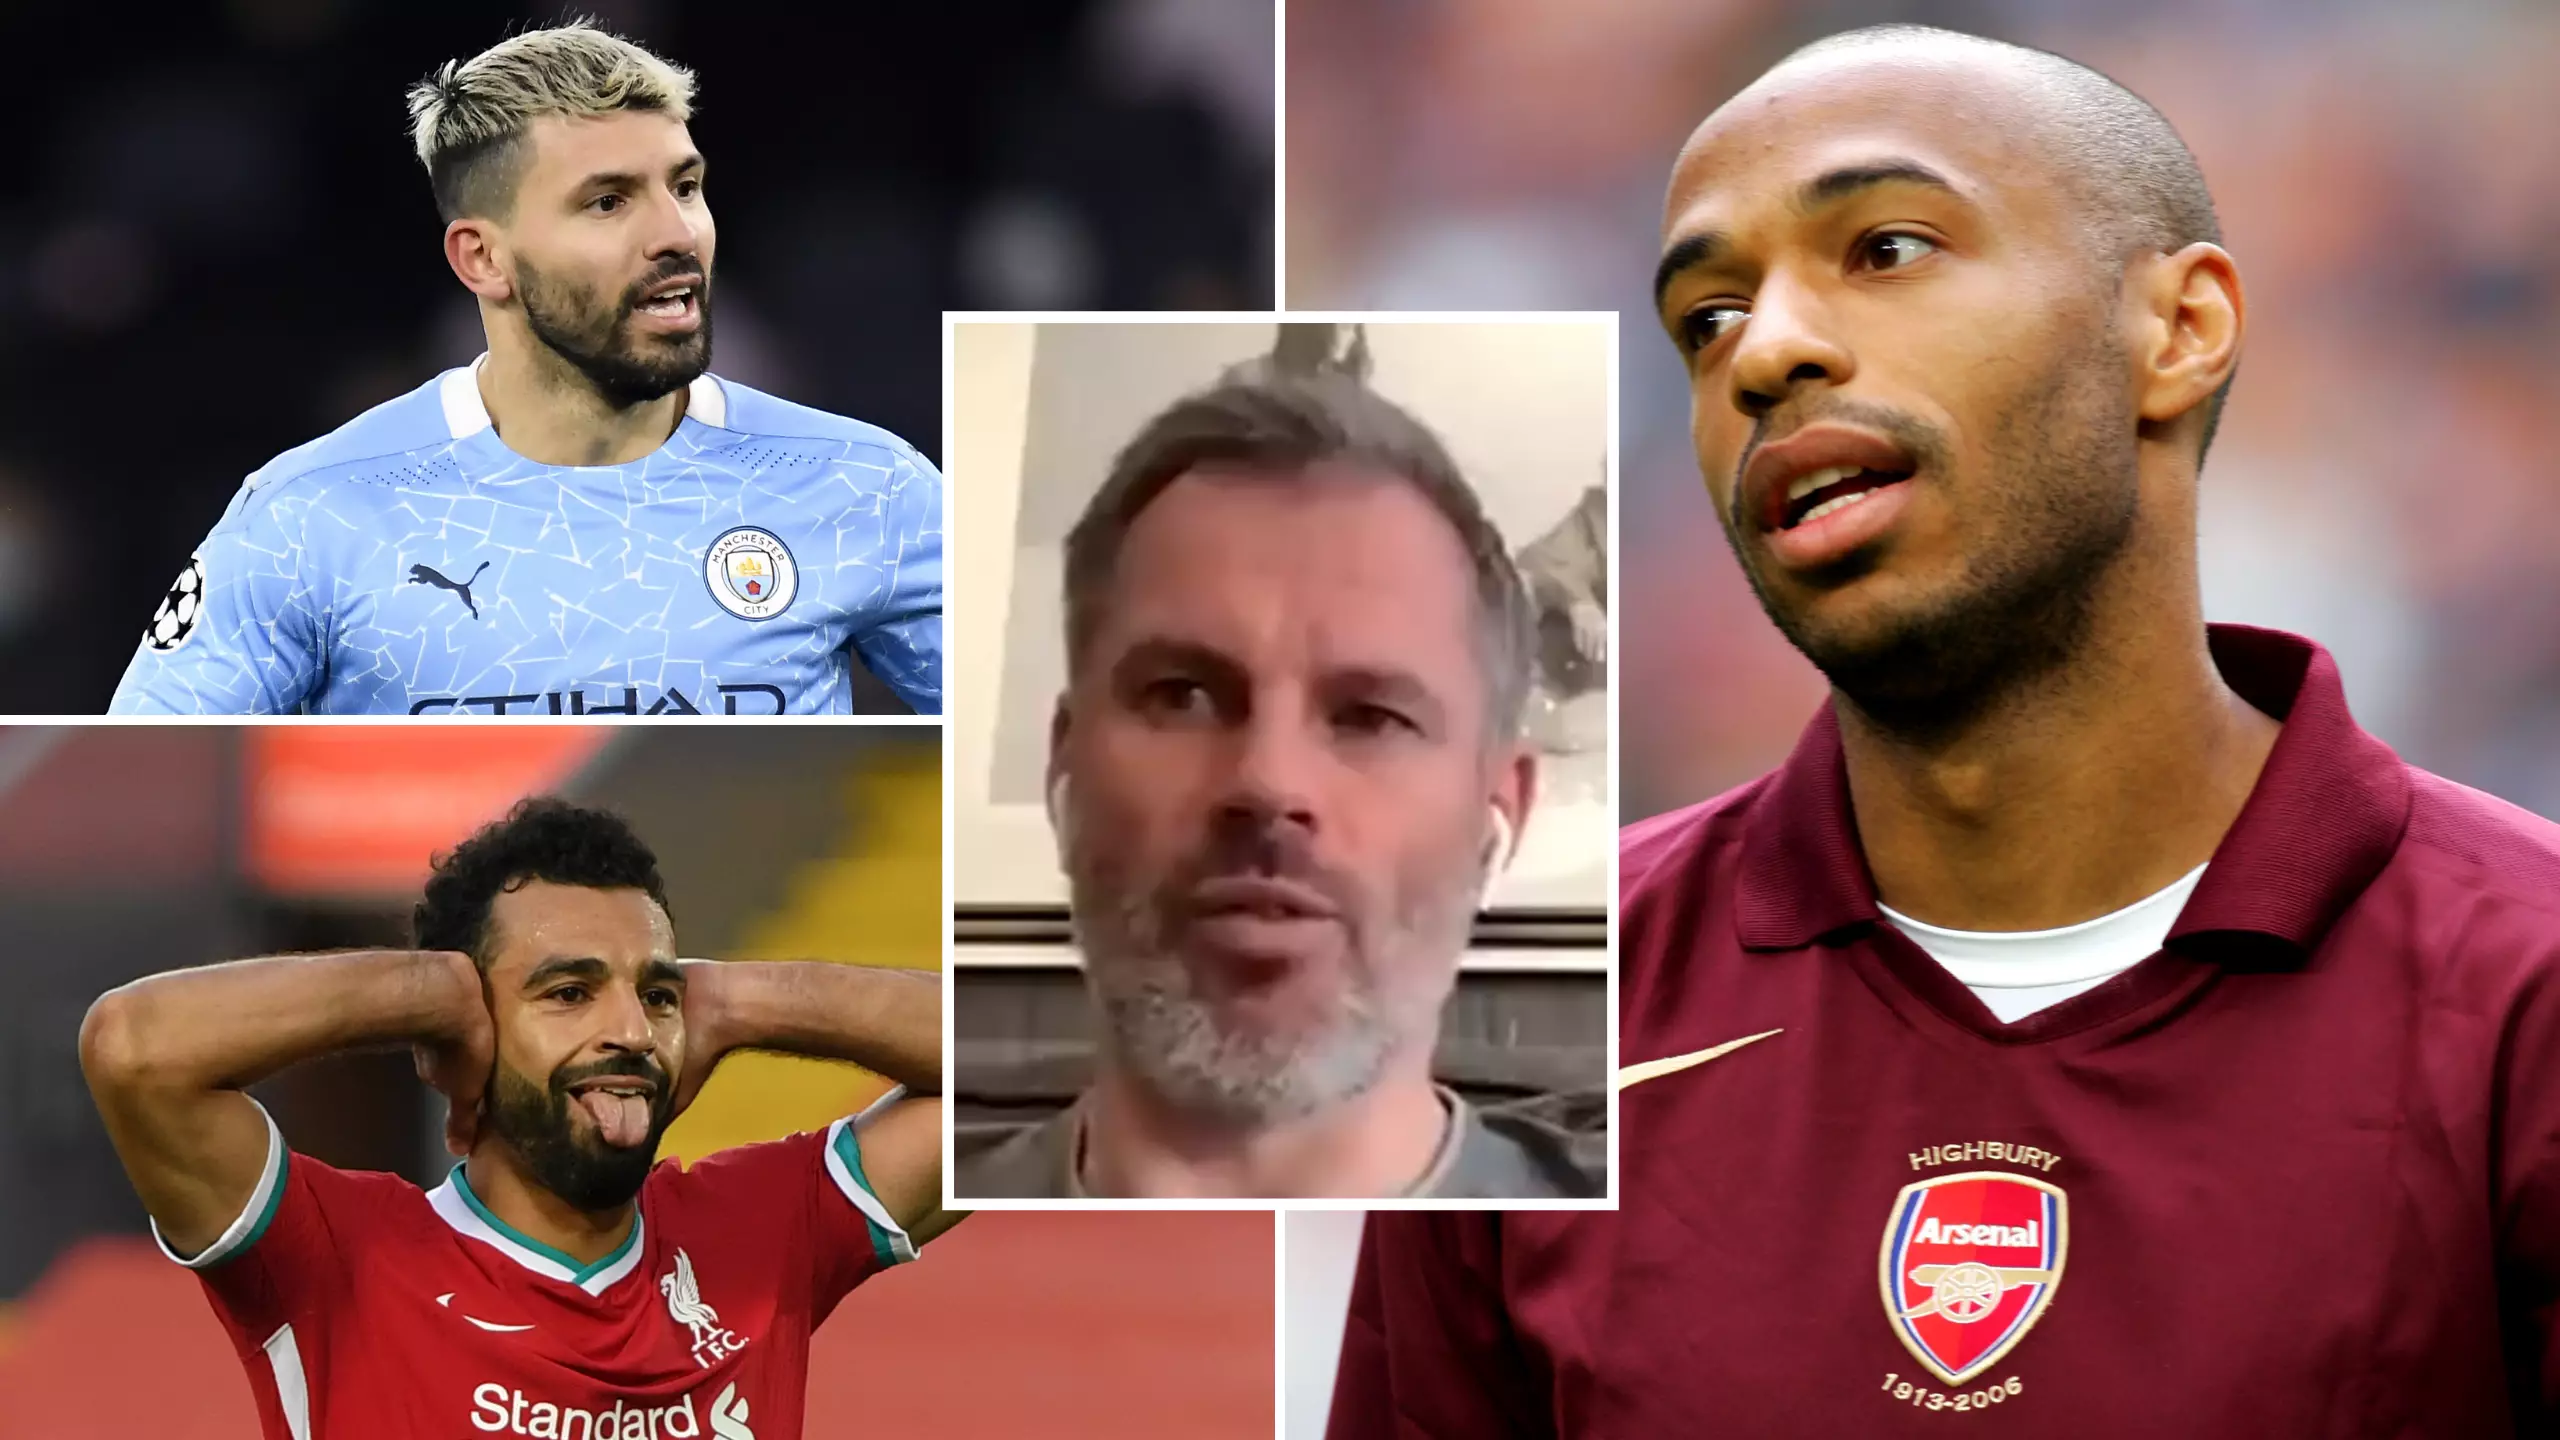 Jamie Carragher Names His Top Ten Premier League Strikers In Incredibly Controversial List